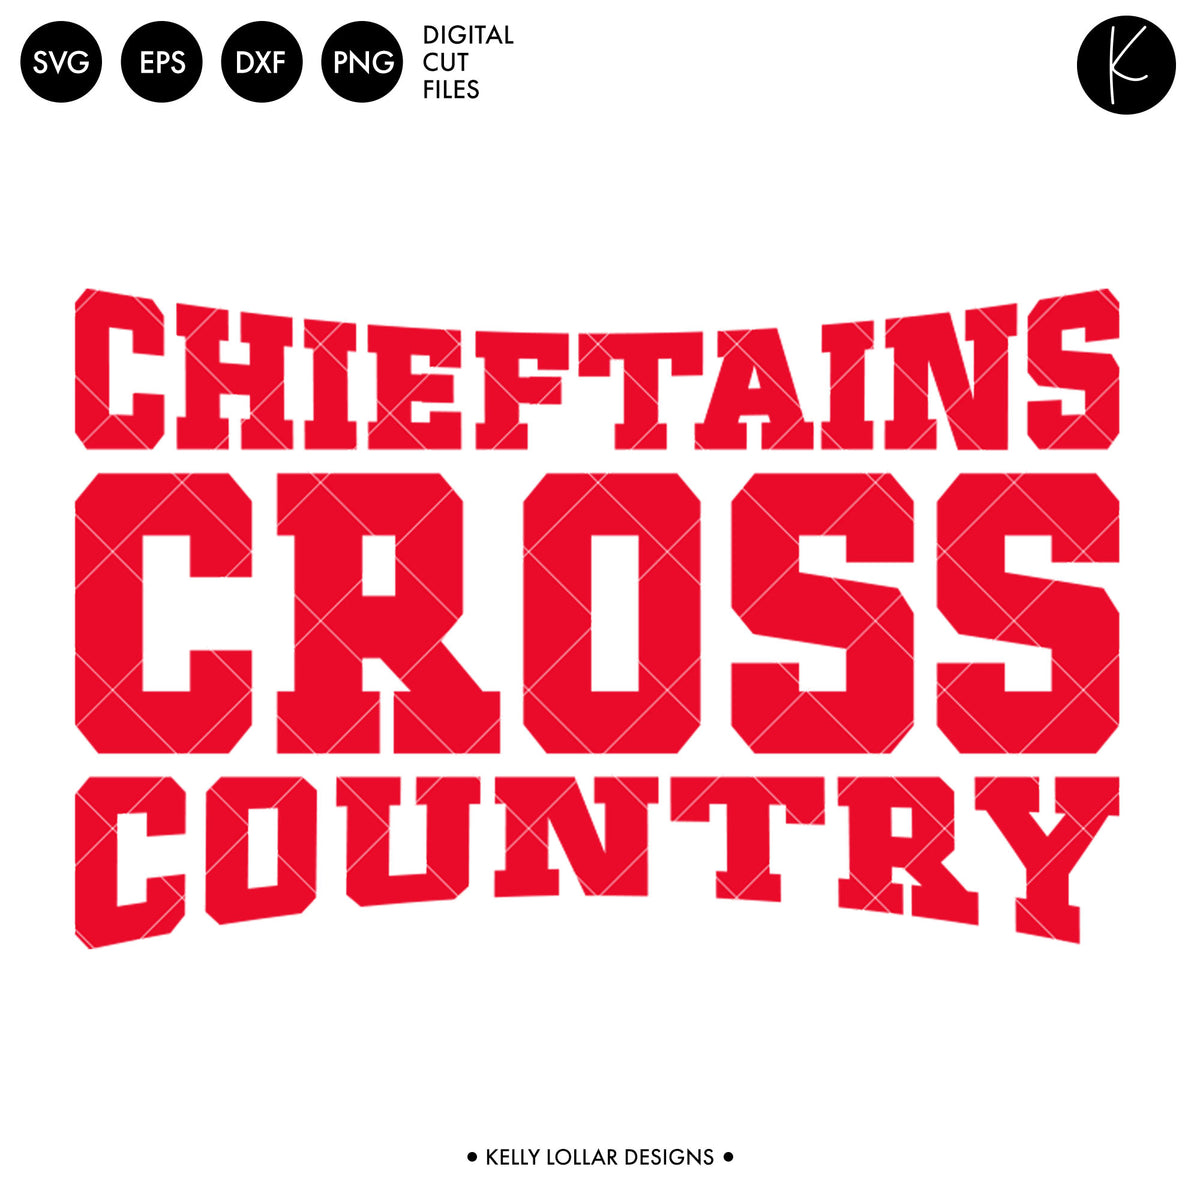 Chieftains Cross Country Bundle | SVG DXF EPS PNG Cut Files